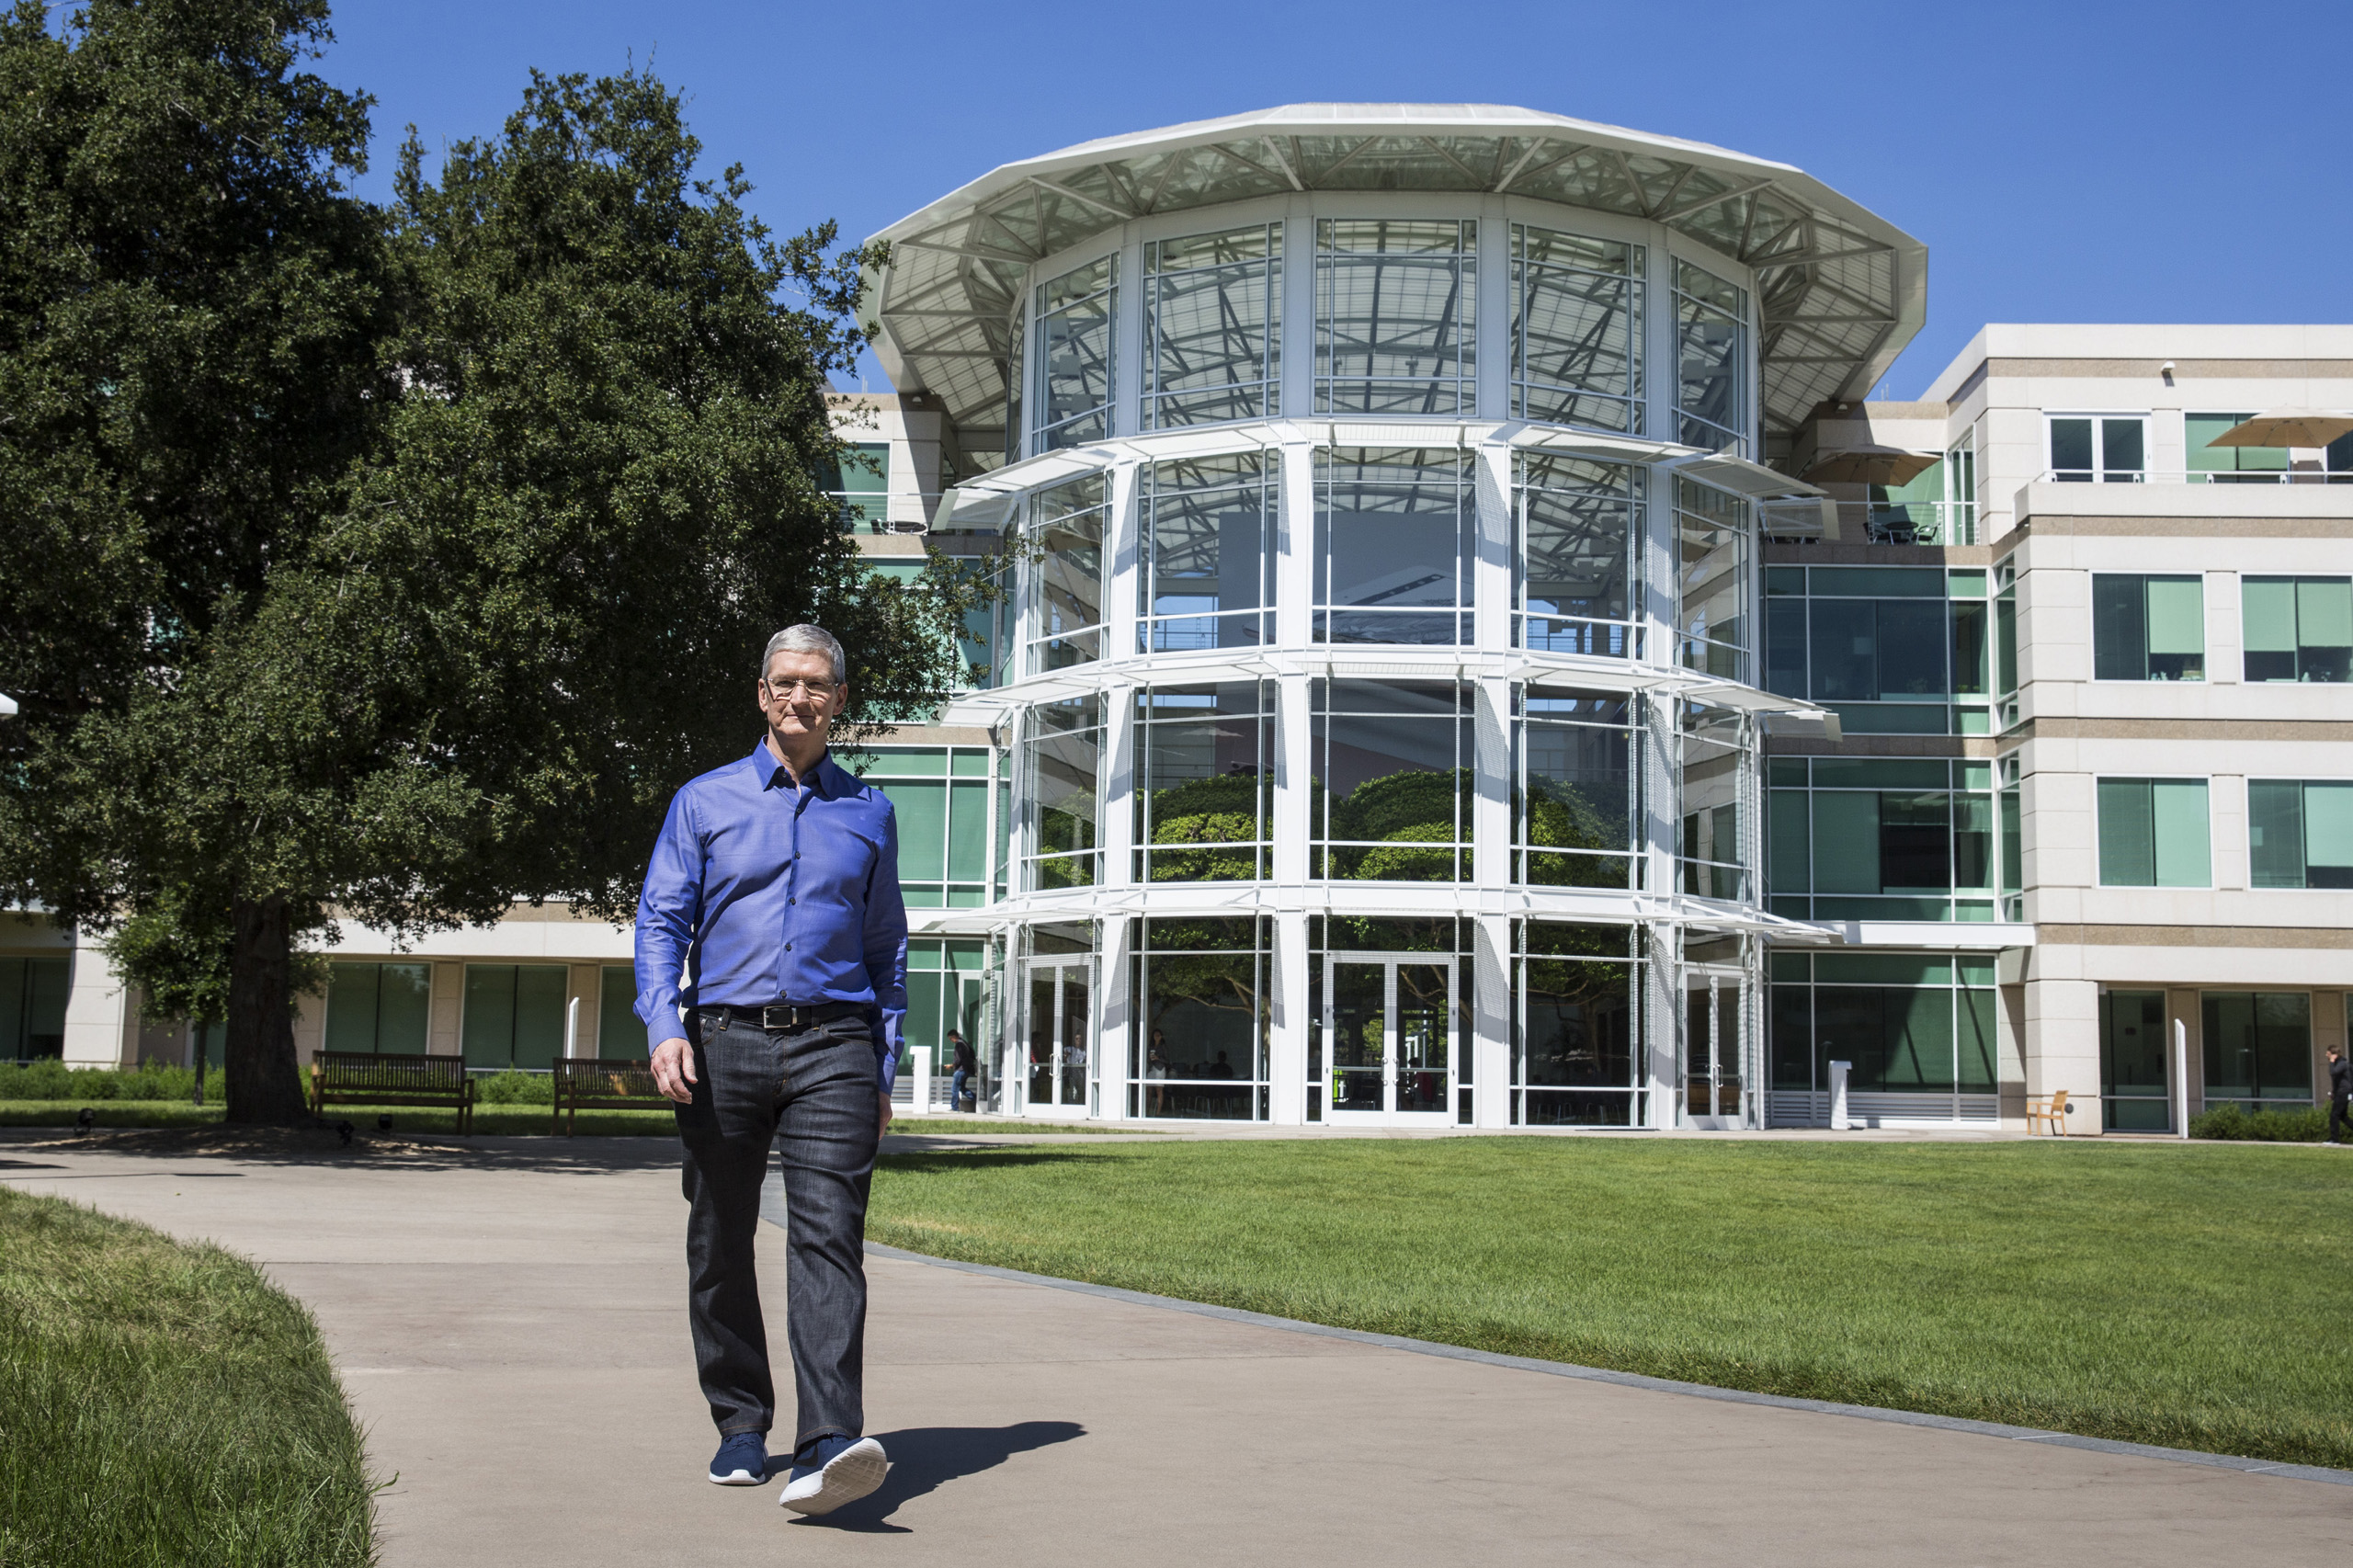 Apple CEO Tim Cook walks through Apple's global headquarters during a photo shoot in Cupertino, Calif. on July 28, 2016. (Andrew Burton—The Washington Post/Getty Images)